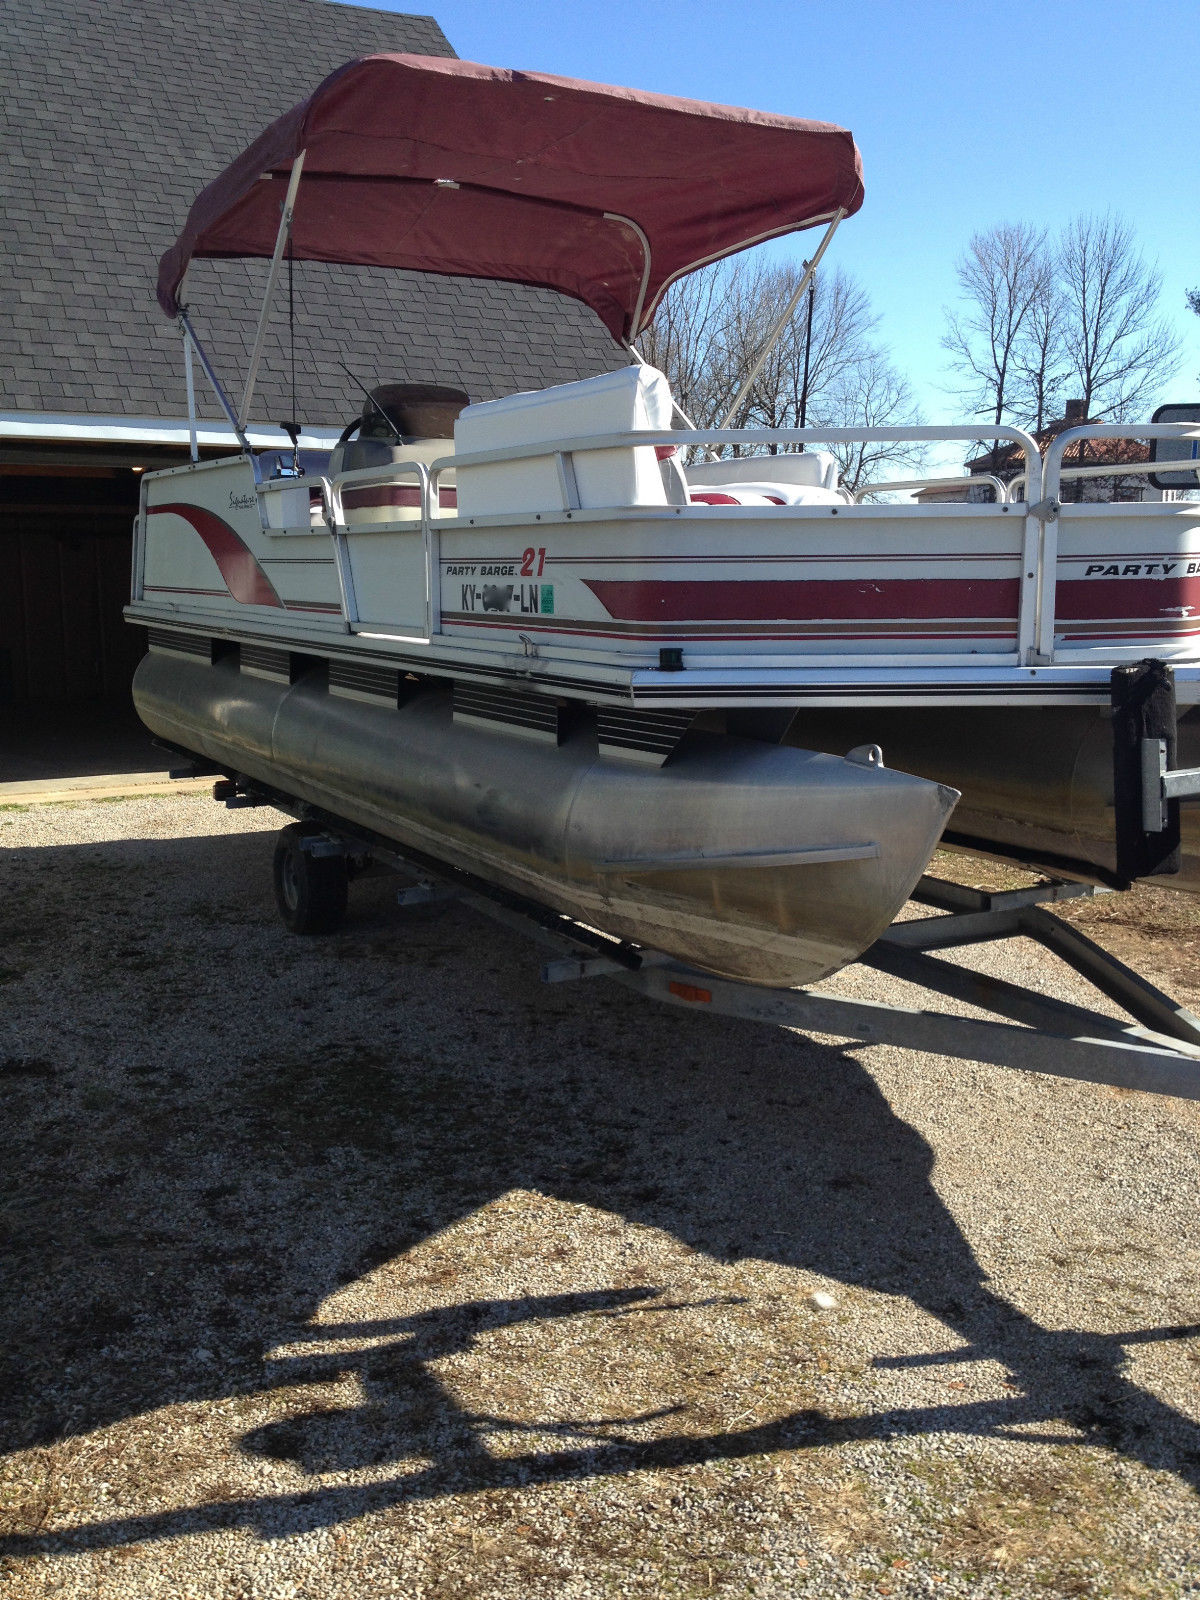 Sun Tracker Pontoon Boat 1998 for sale for $6,500 - Boats ...